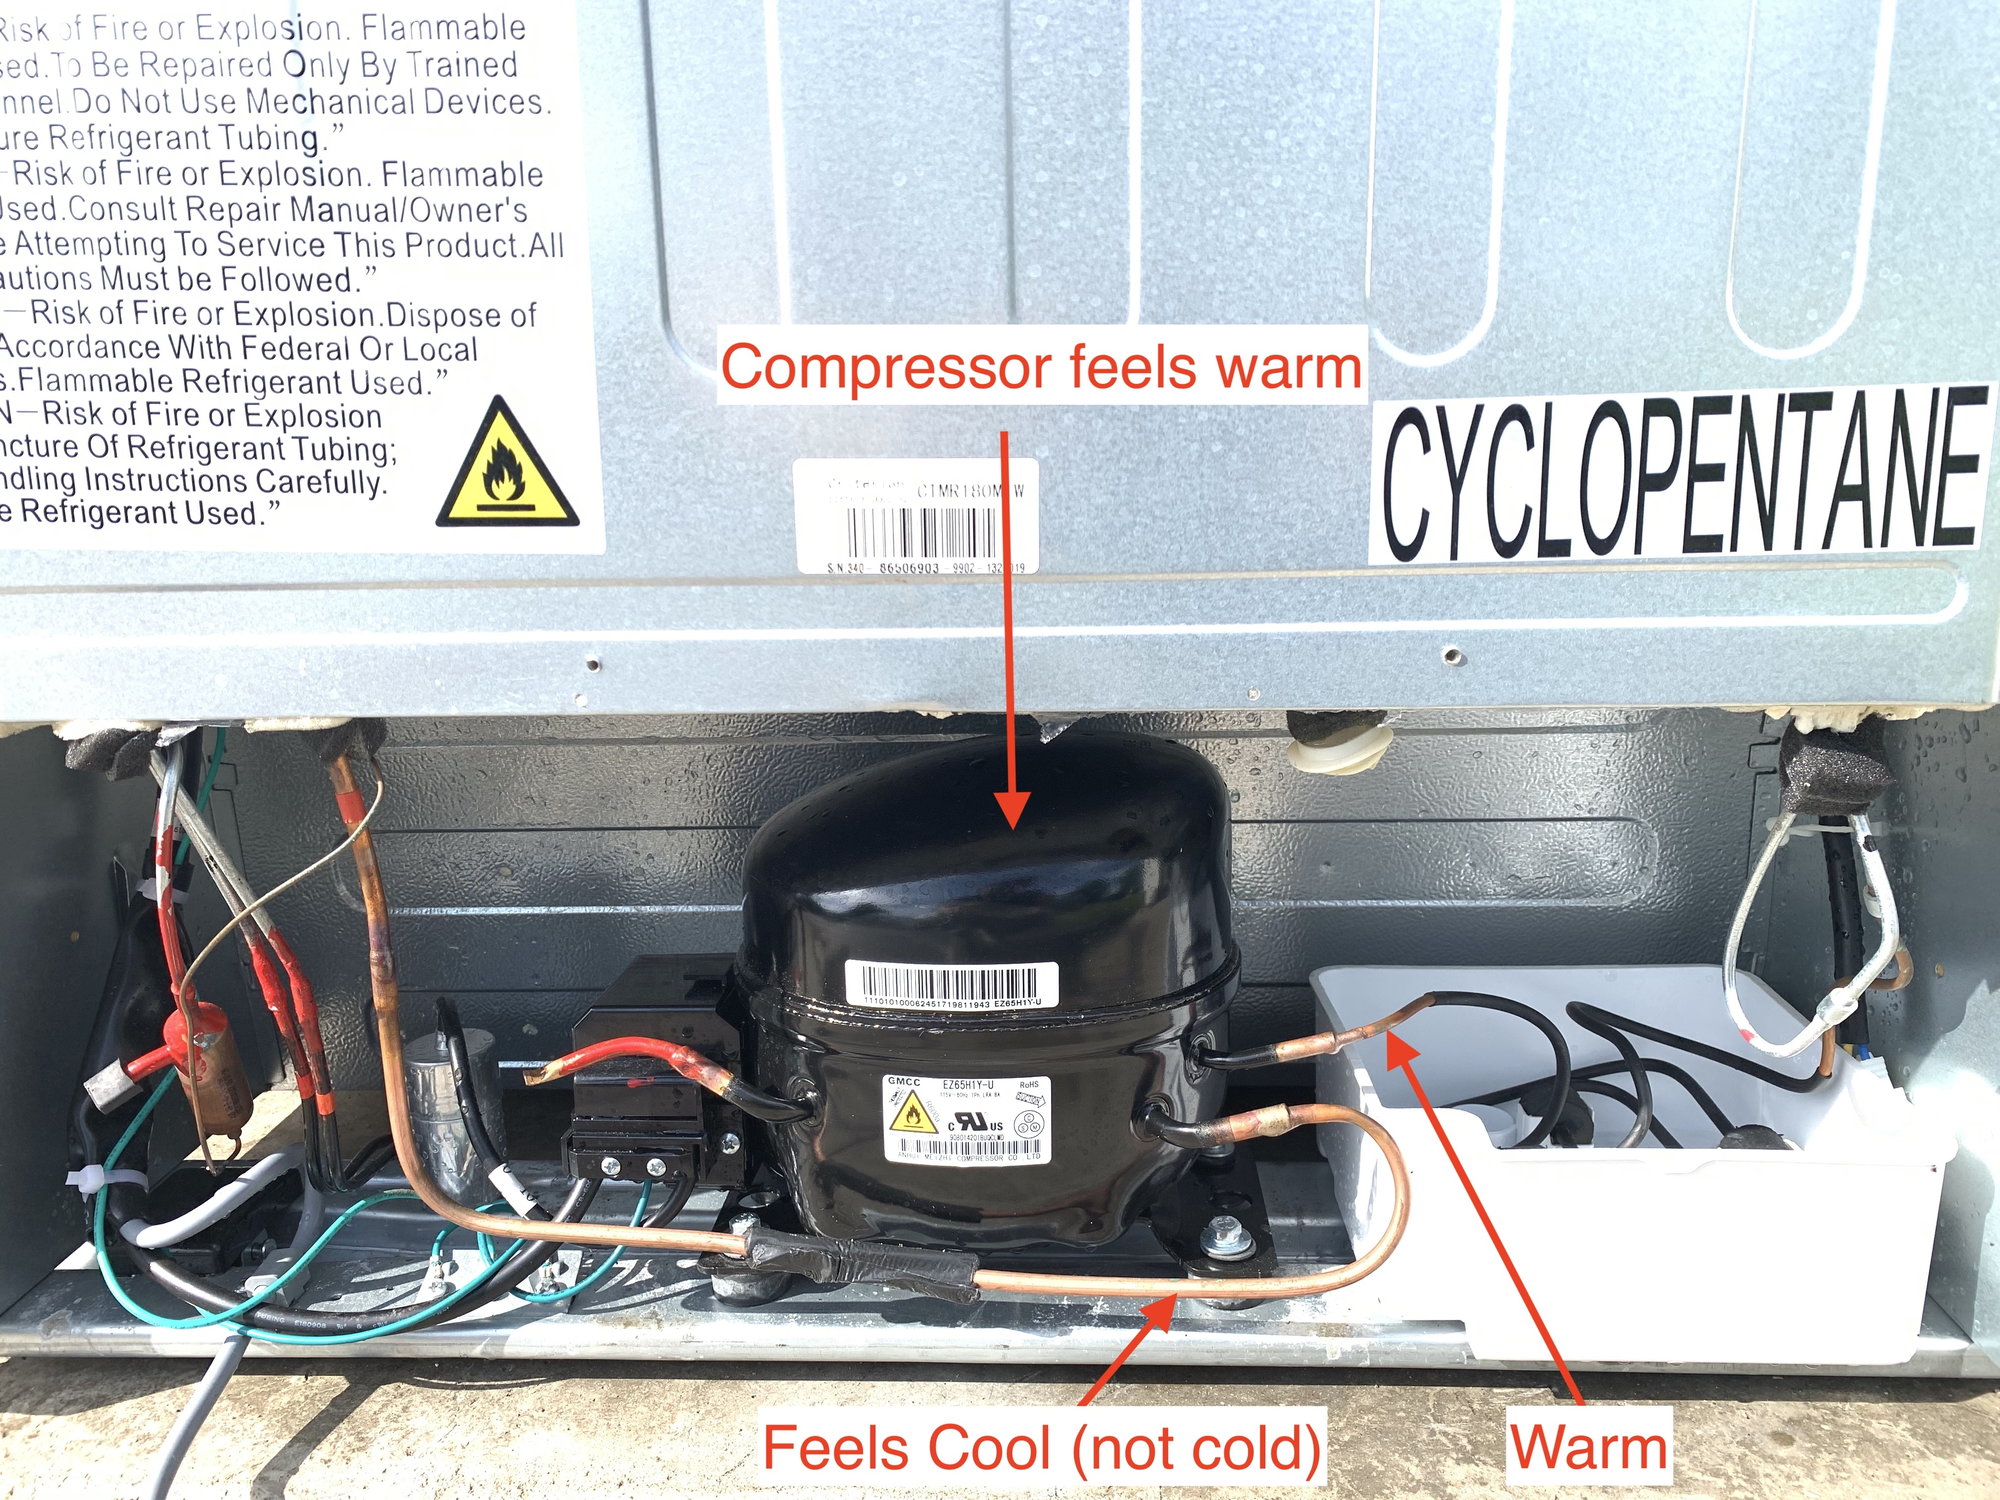 Possible refrigerator thermostat problems - Refrigeration tips